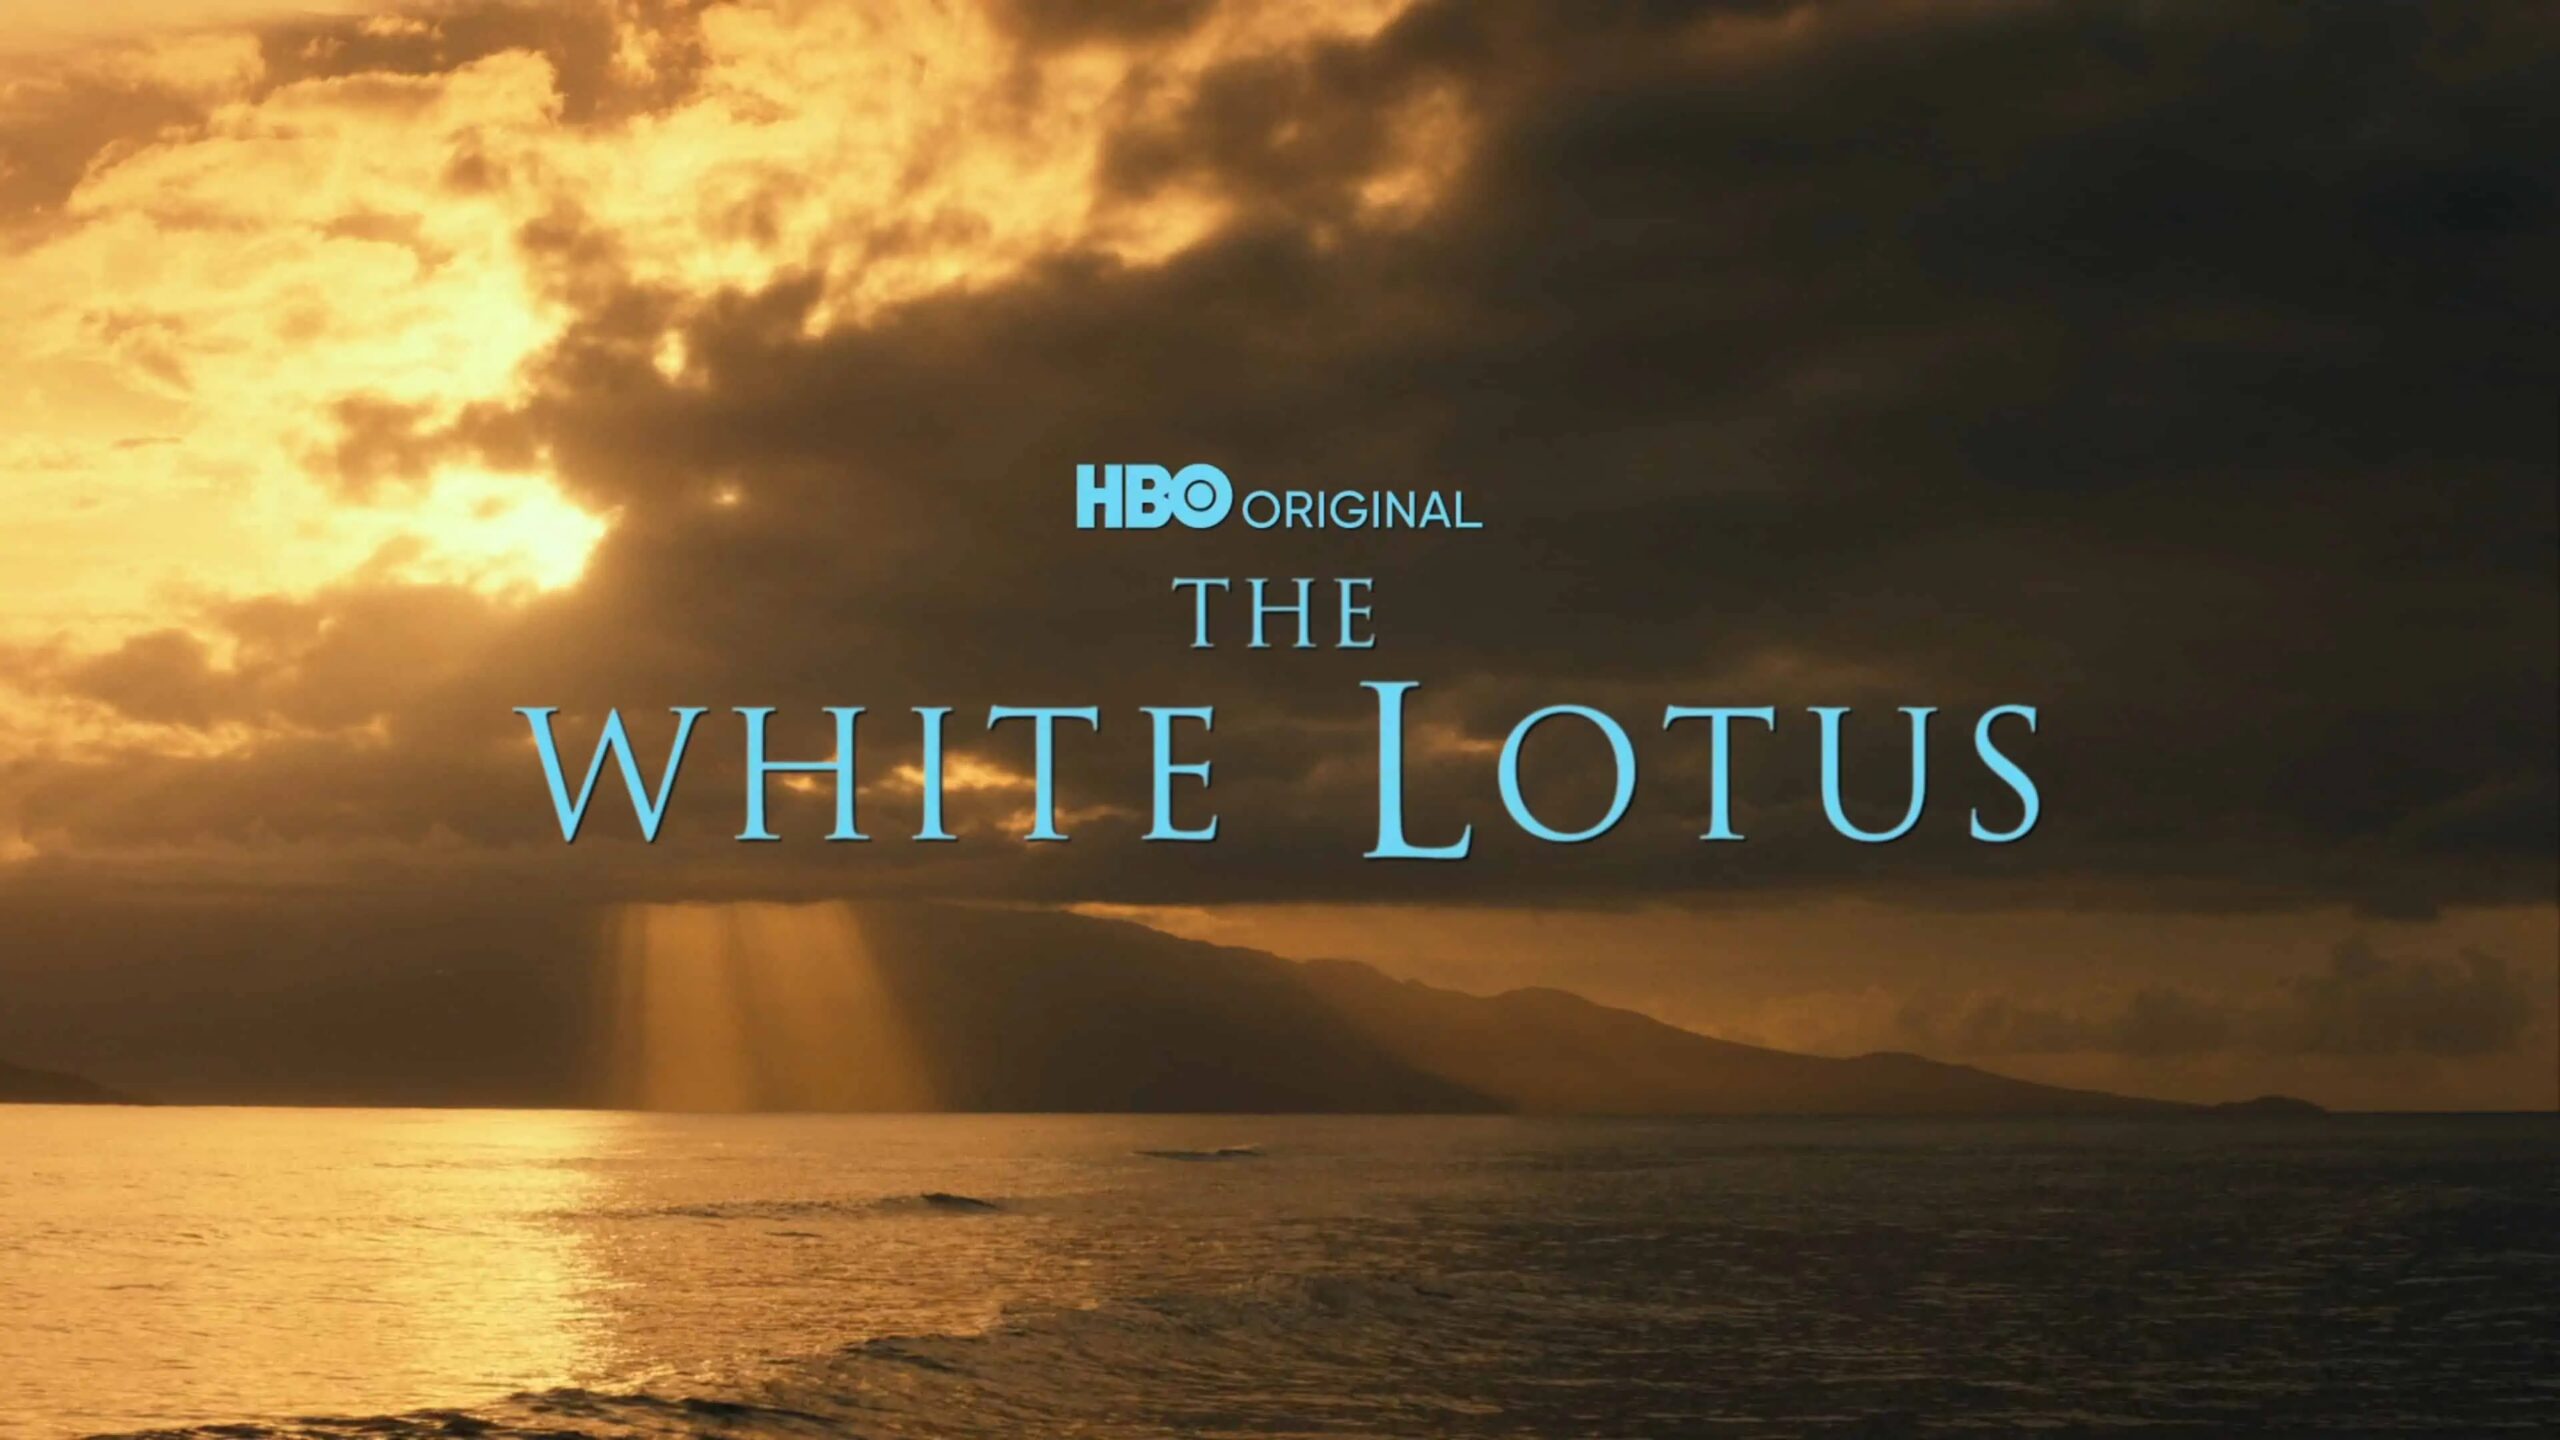 The White Lotus (HBO) Character Guide